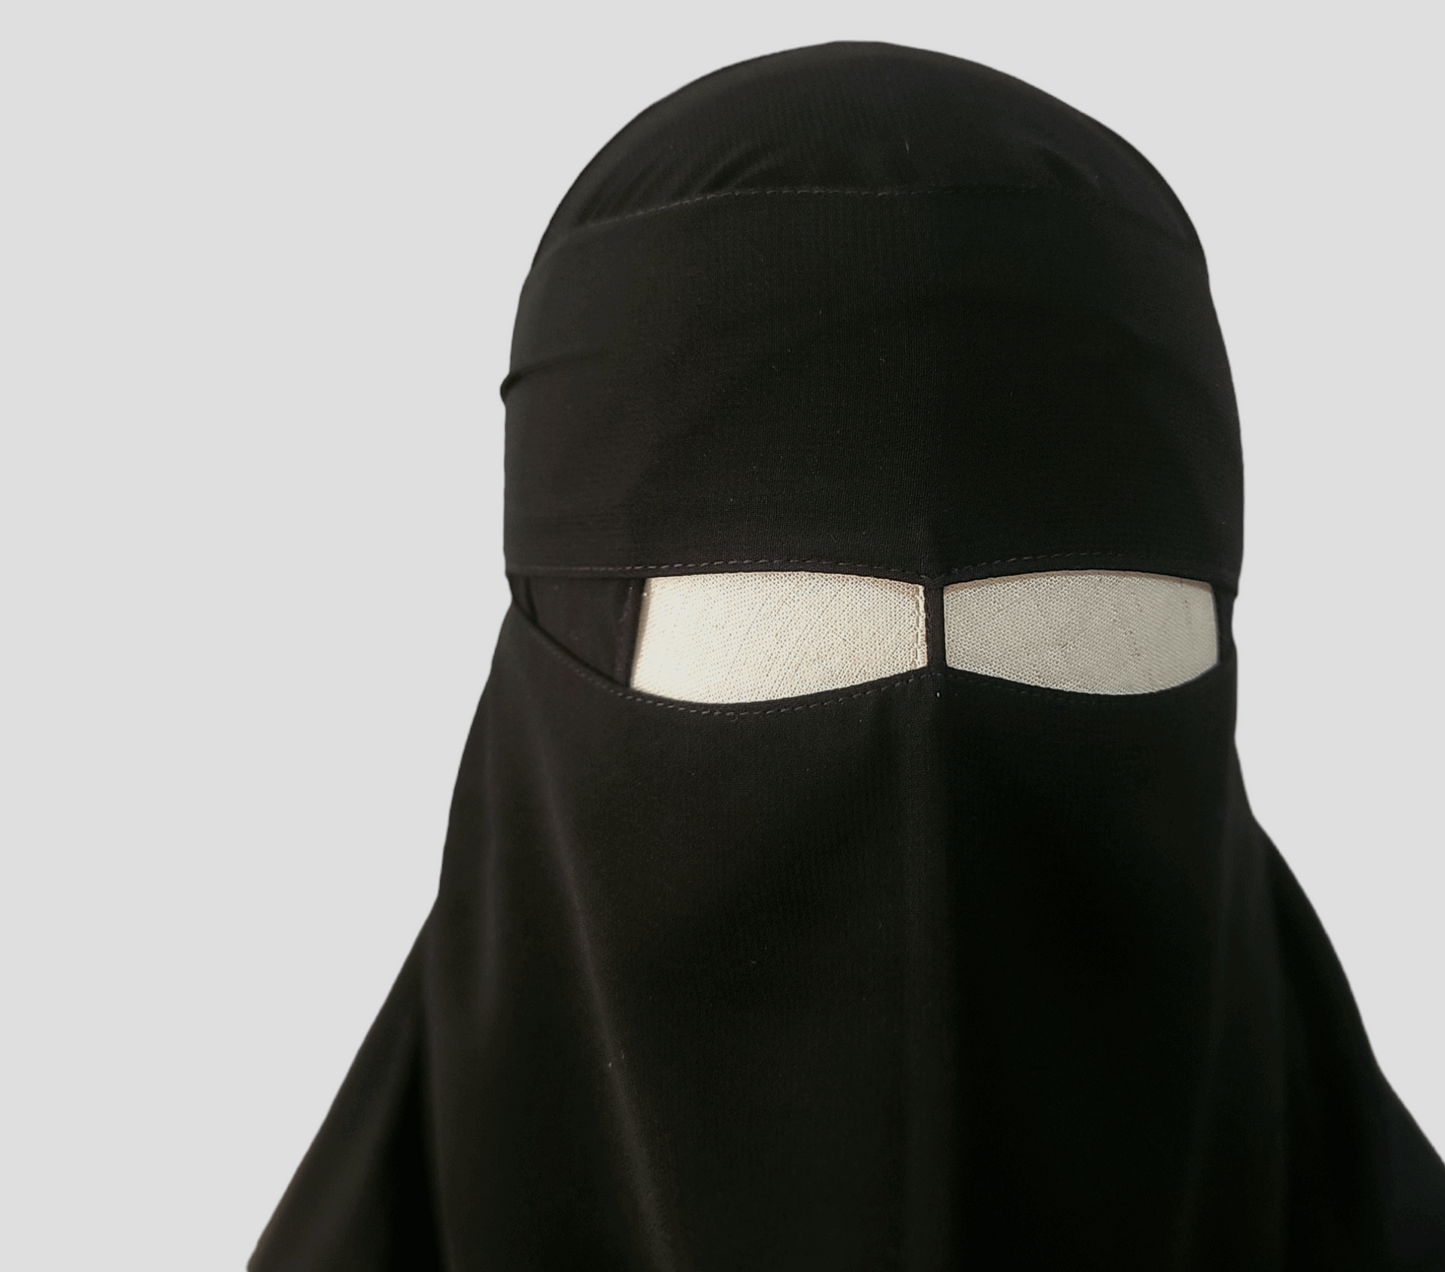 Single layer niqab with nose string